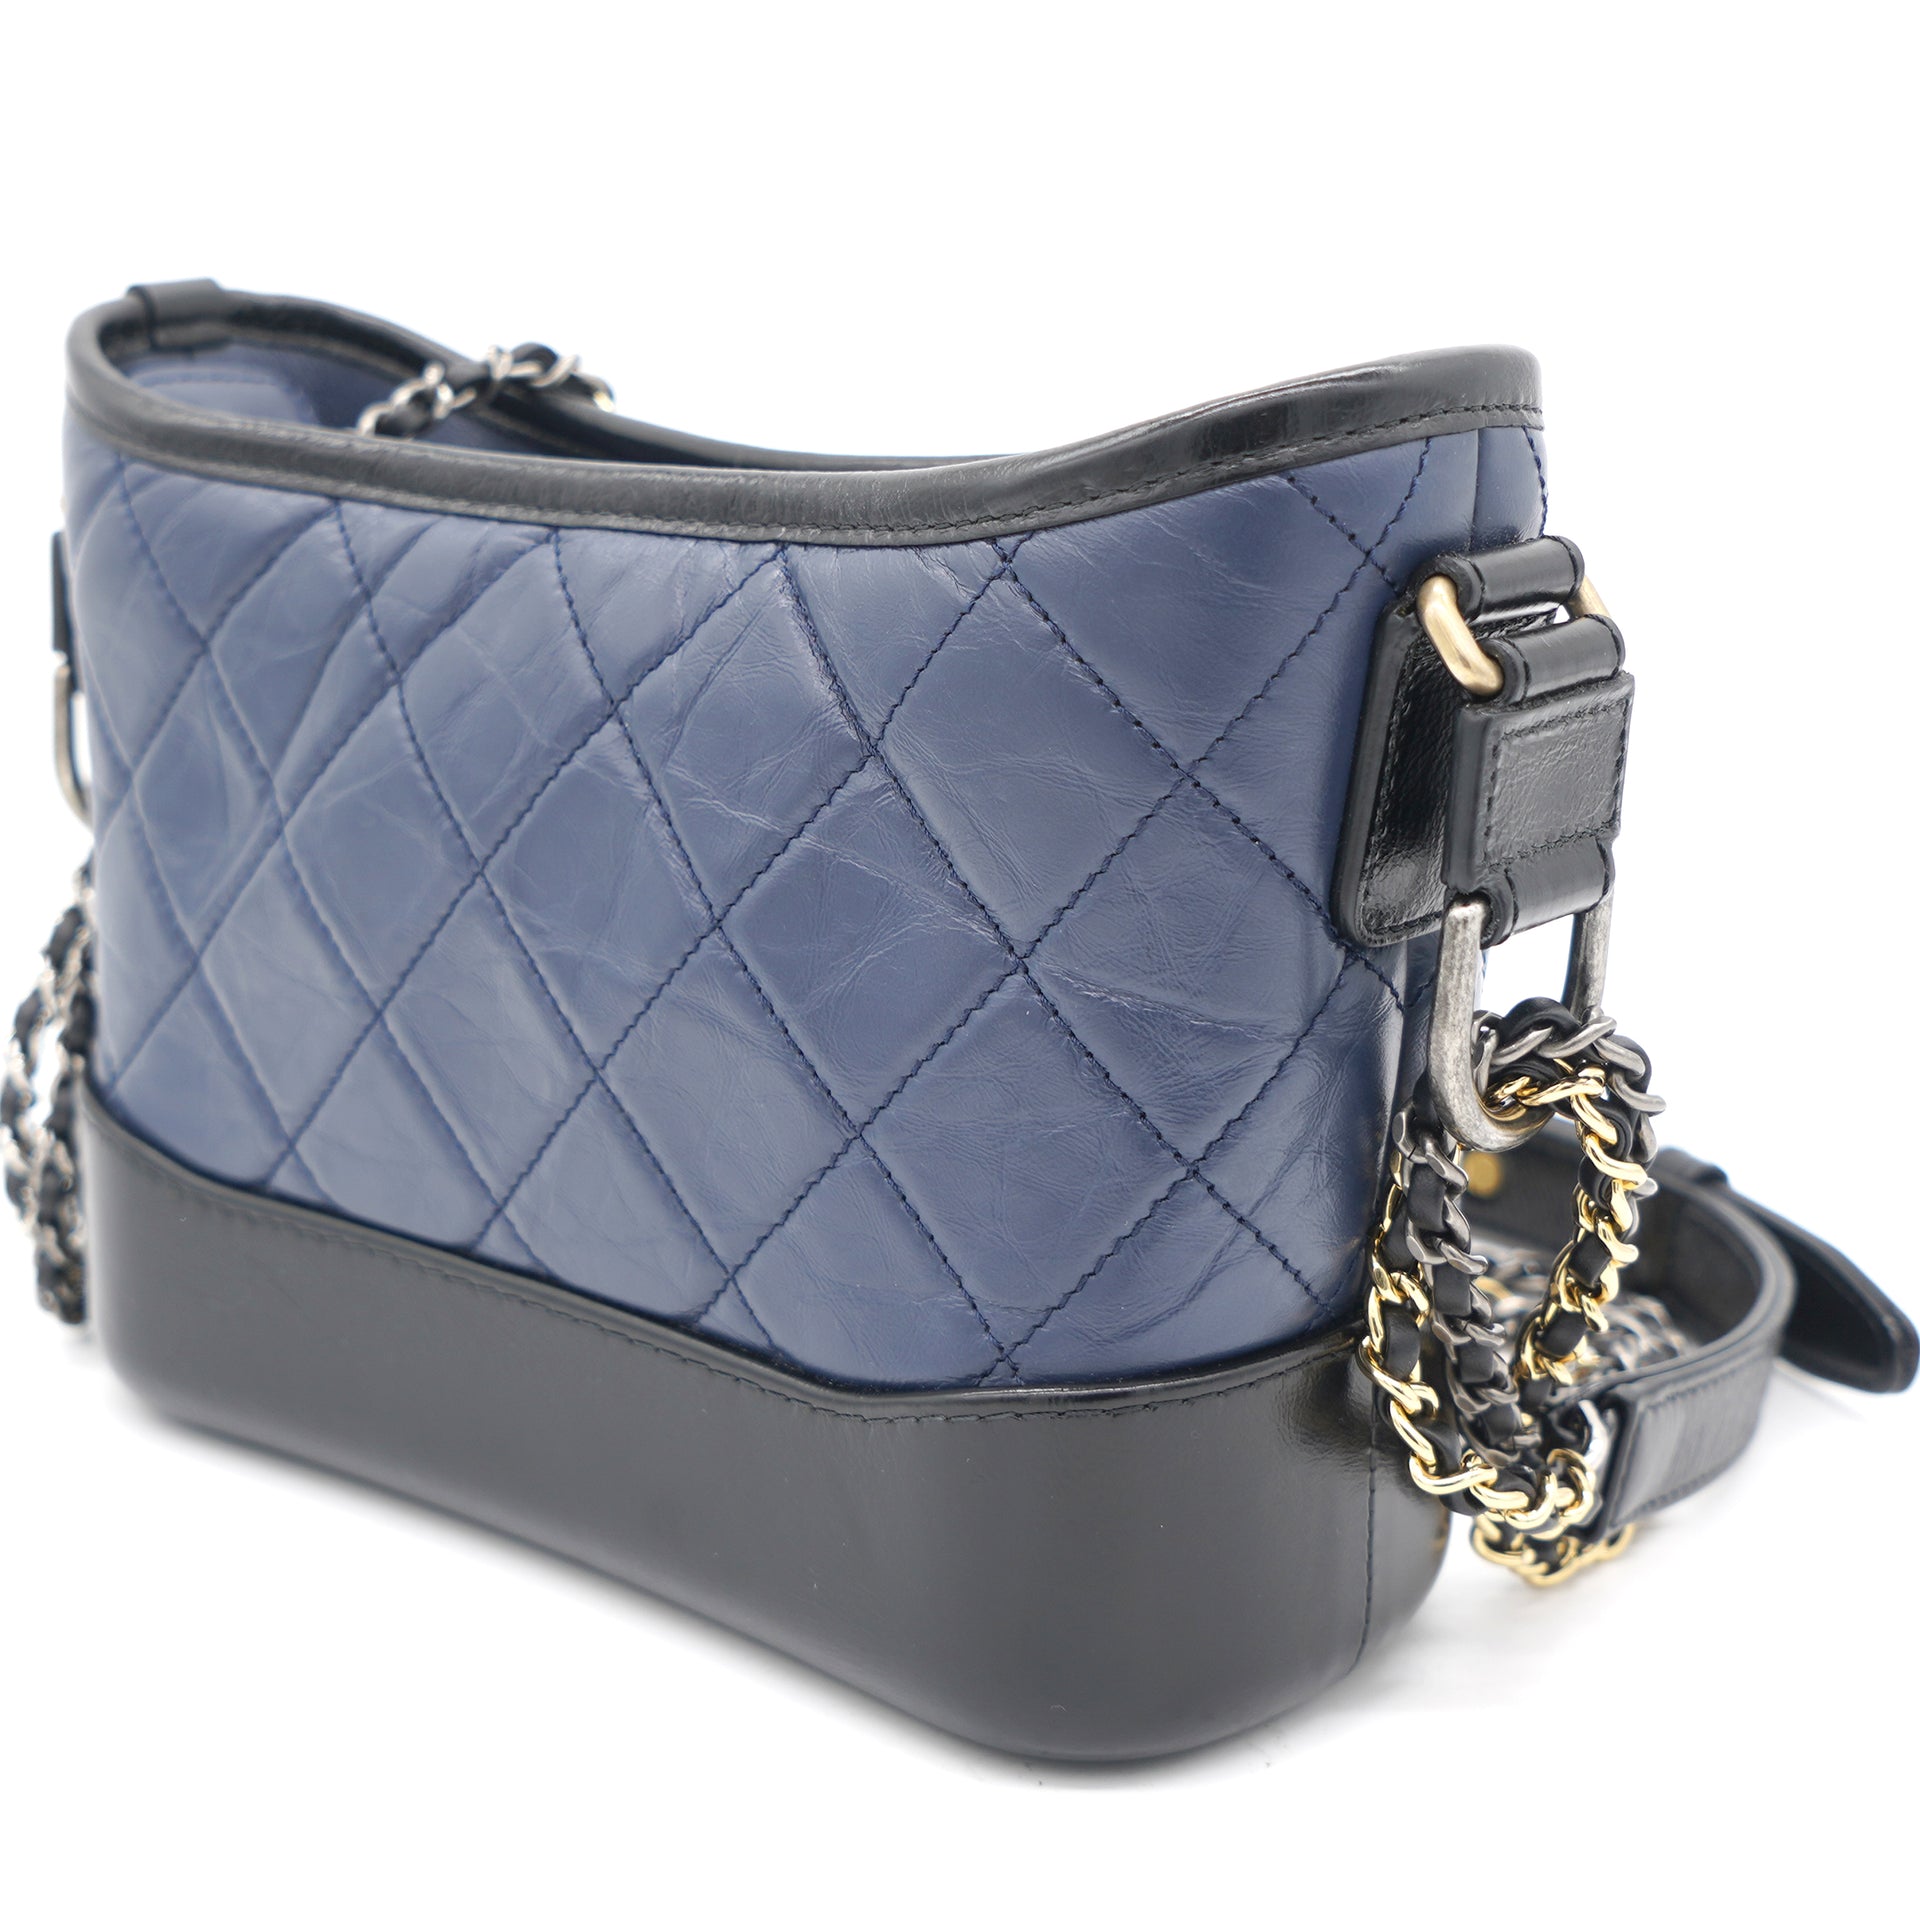 Black and Navy Blue Quilted Tweed Small Gabrielle Hobo Bag